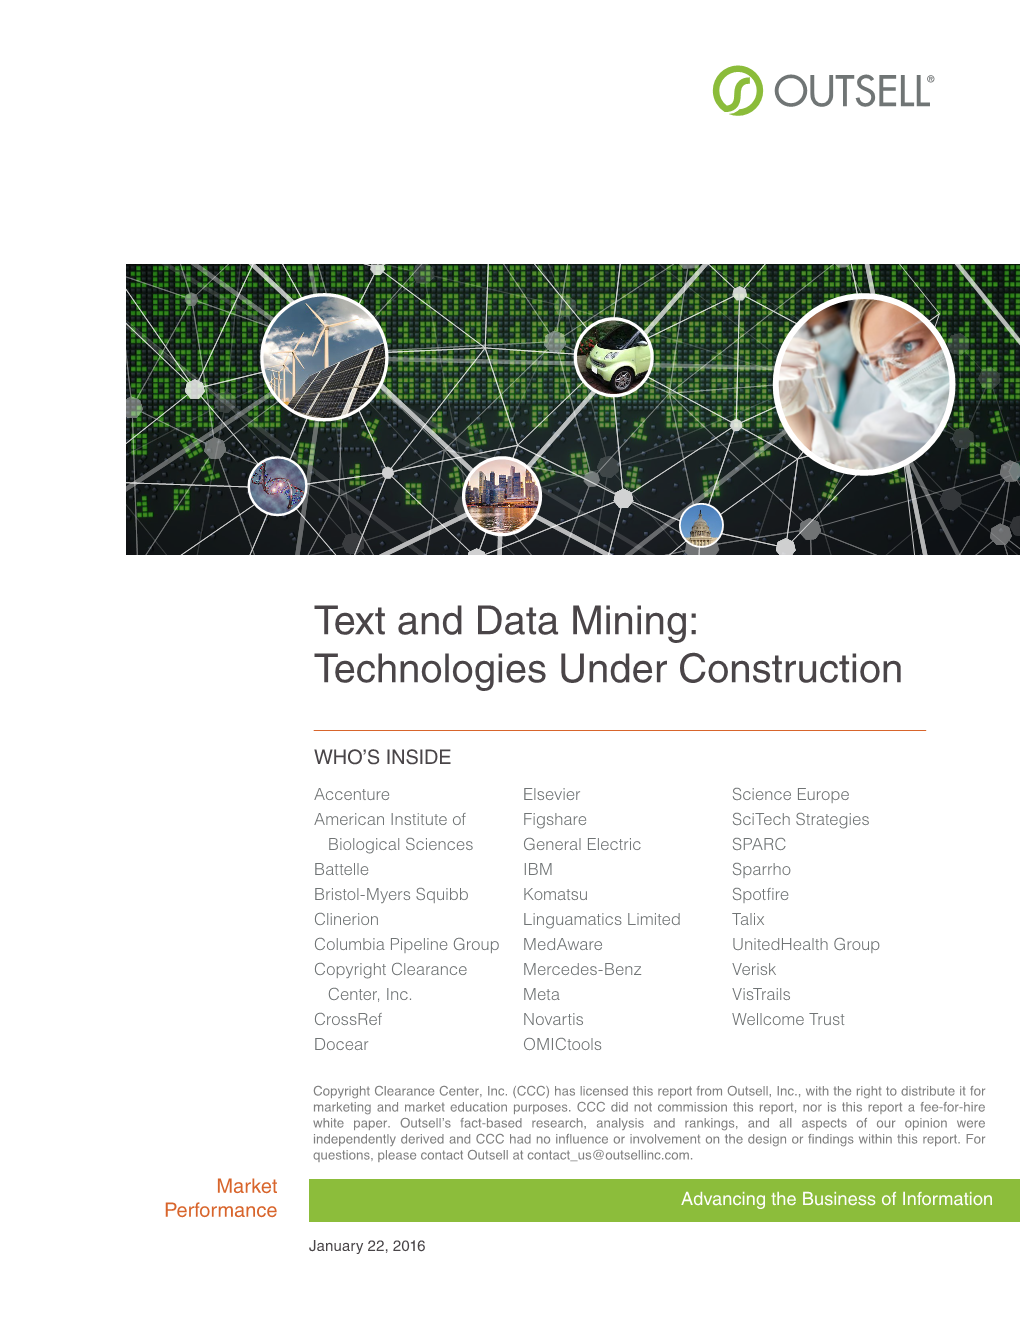 Text and Data Mining: Technologies Under Construction